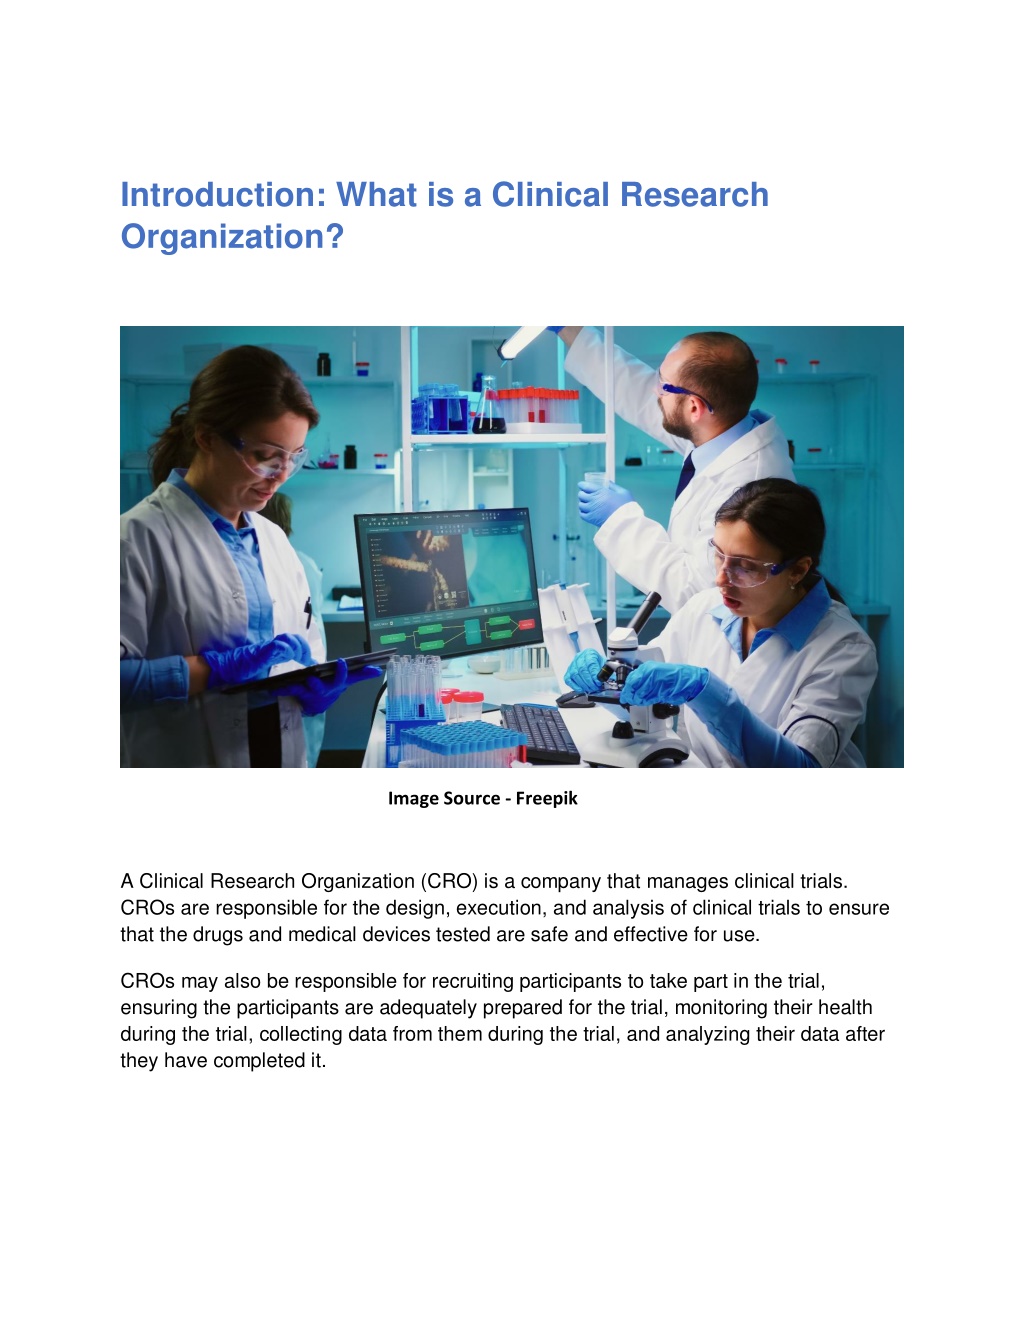 how do clinical research organizations work